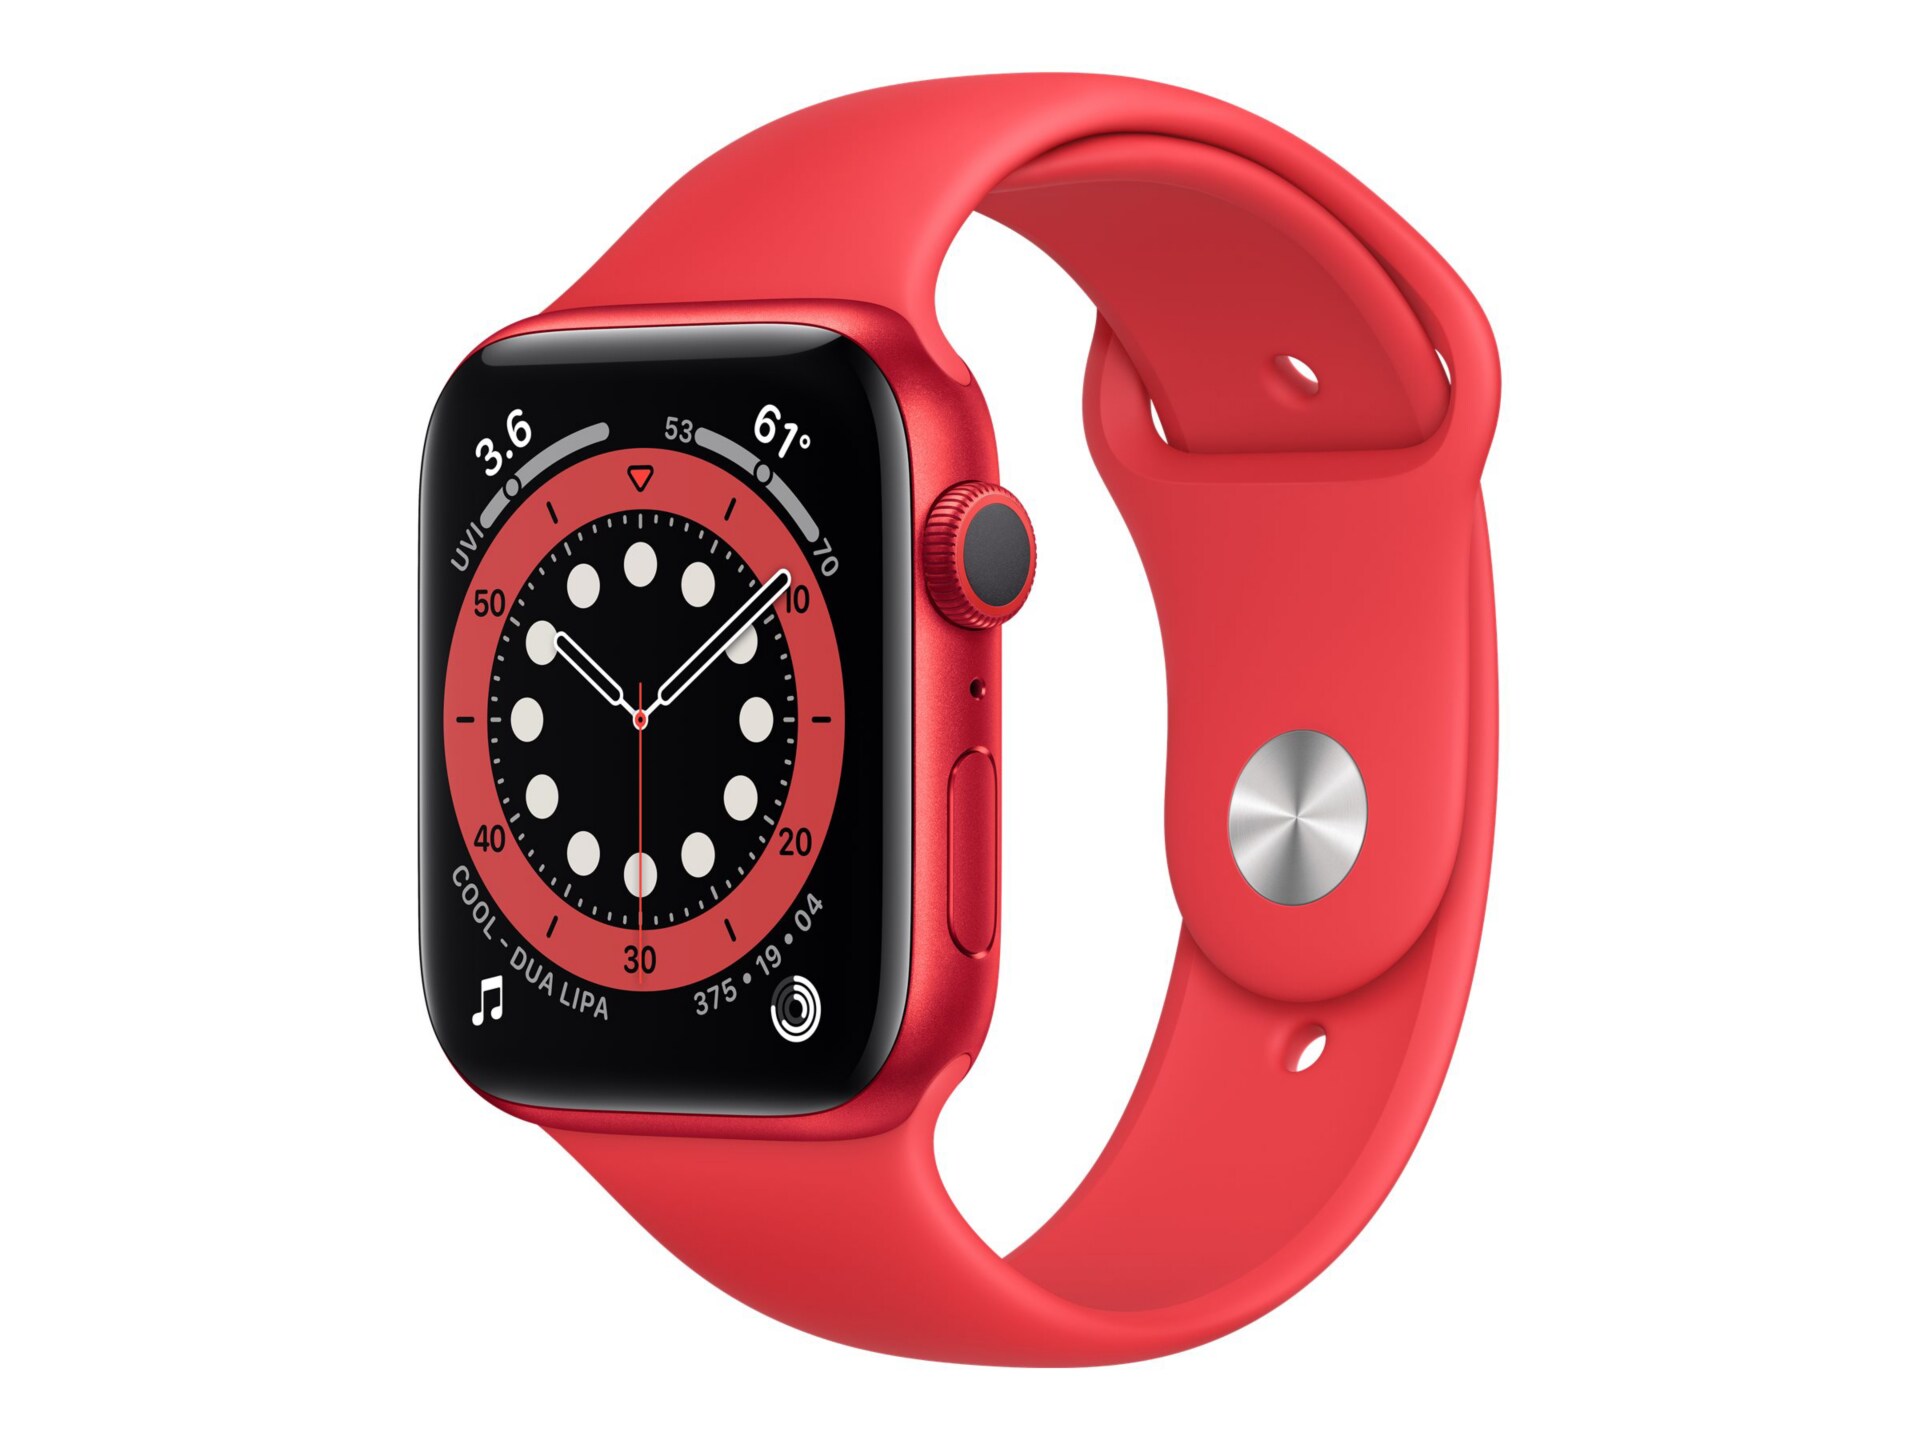 Apple Watch Series 6 (GPS + Cellular) (PRODUCT) RED - red aluminum - smart